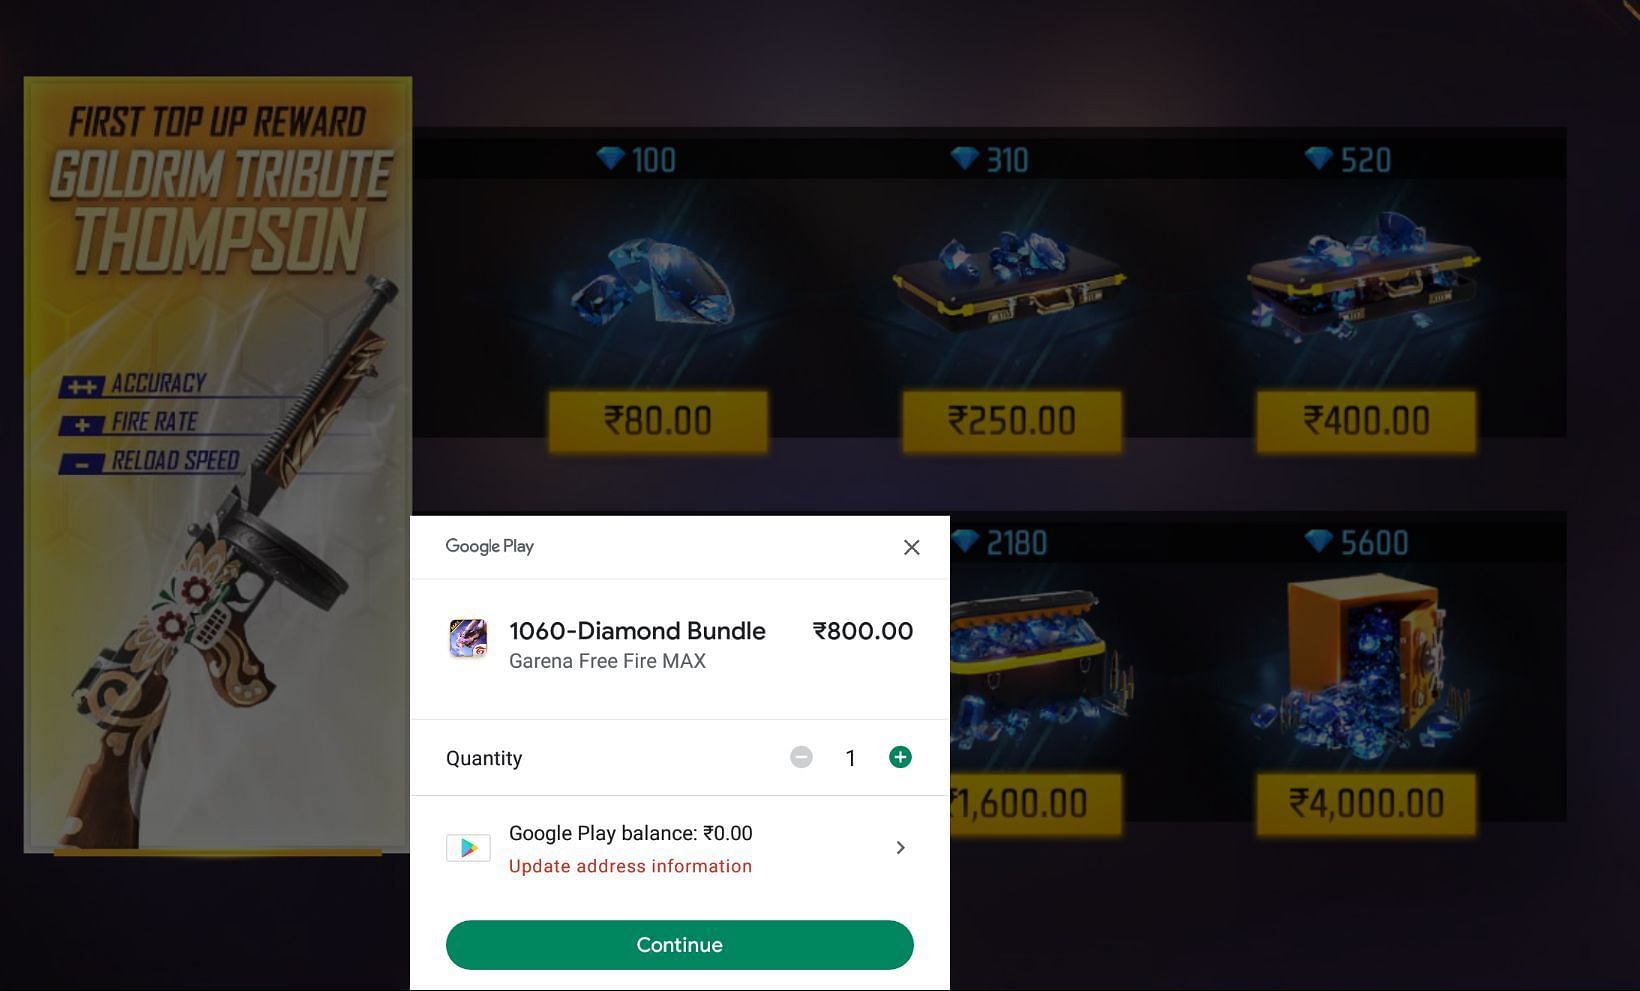 MTCGAME - Buy cheap Diamonds for Free Fire & Enjoy the game!! Our Live  Support is always ready to help you with our multi language 24/7 support.  #mtcgame #FreeFire #CheapDiamonds #LiveSupport #PlaySafe #